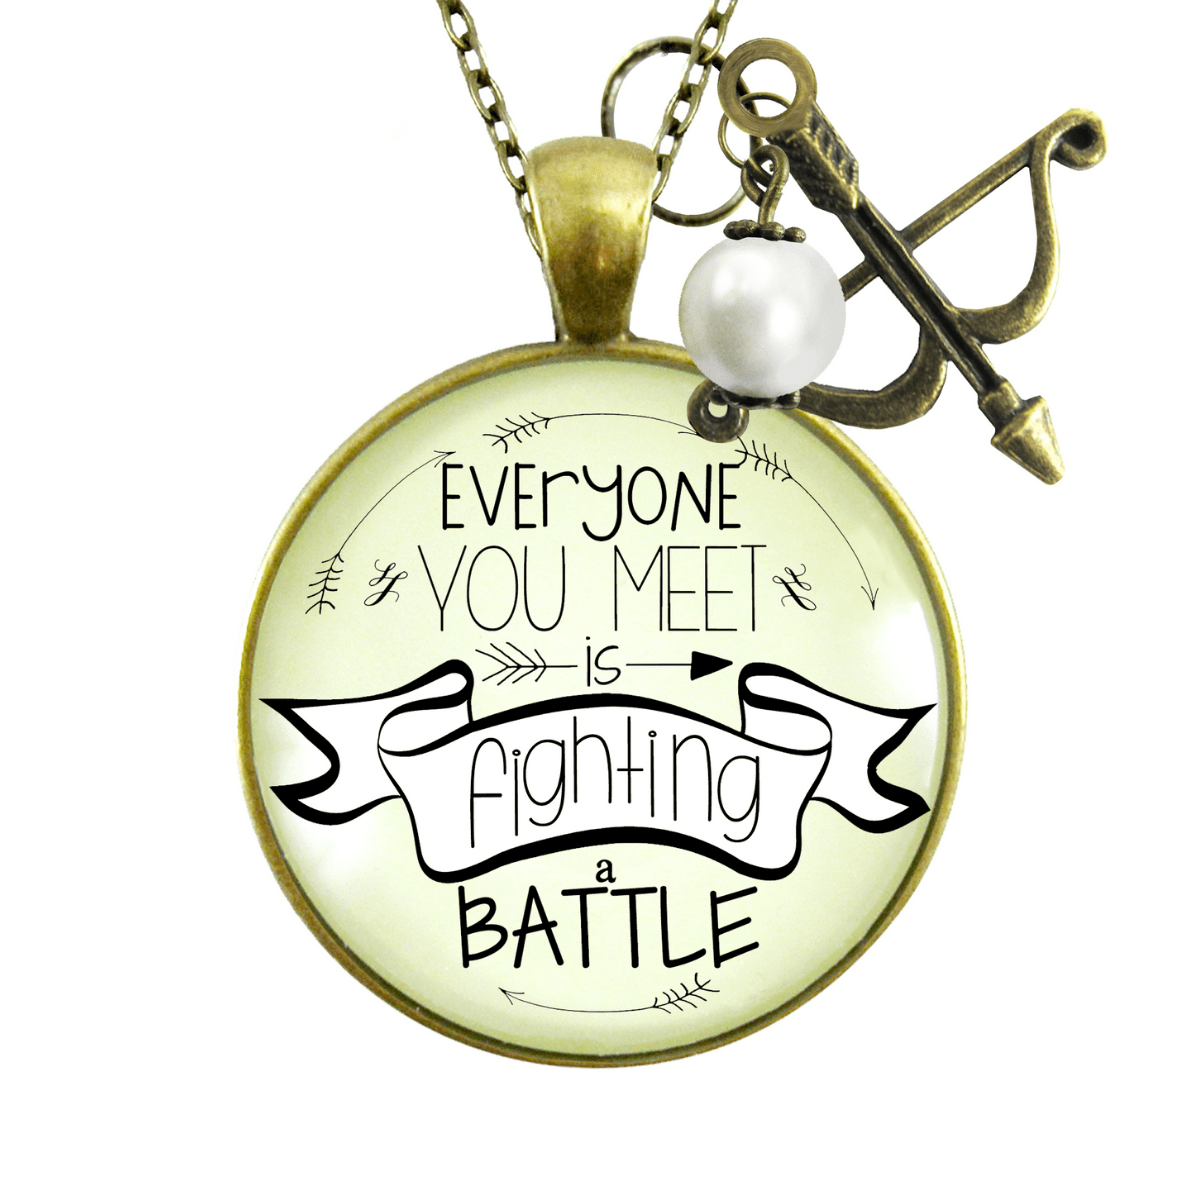 Gutsy Goodness Everyone You Meet is Fighting a Battle Warrior Necklace Jewelry - Gutsy Goodness Handmade Jewelry;Everyone You Meet Is Fighting A Battle Warrior Necklace Jewelry - Gutsy Goodness Handmade Jewelry Gifts